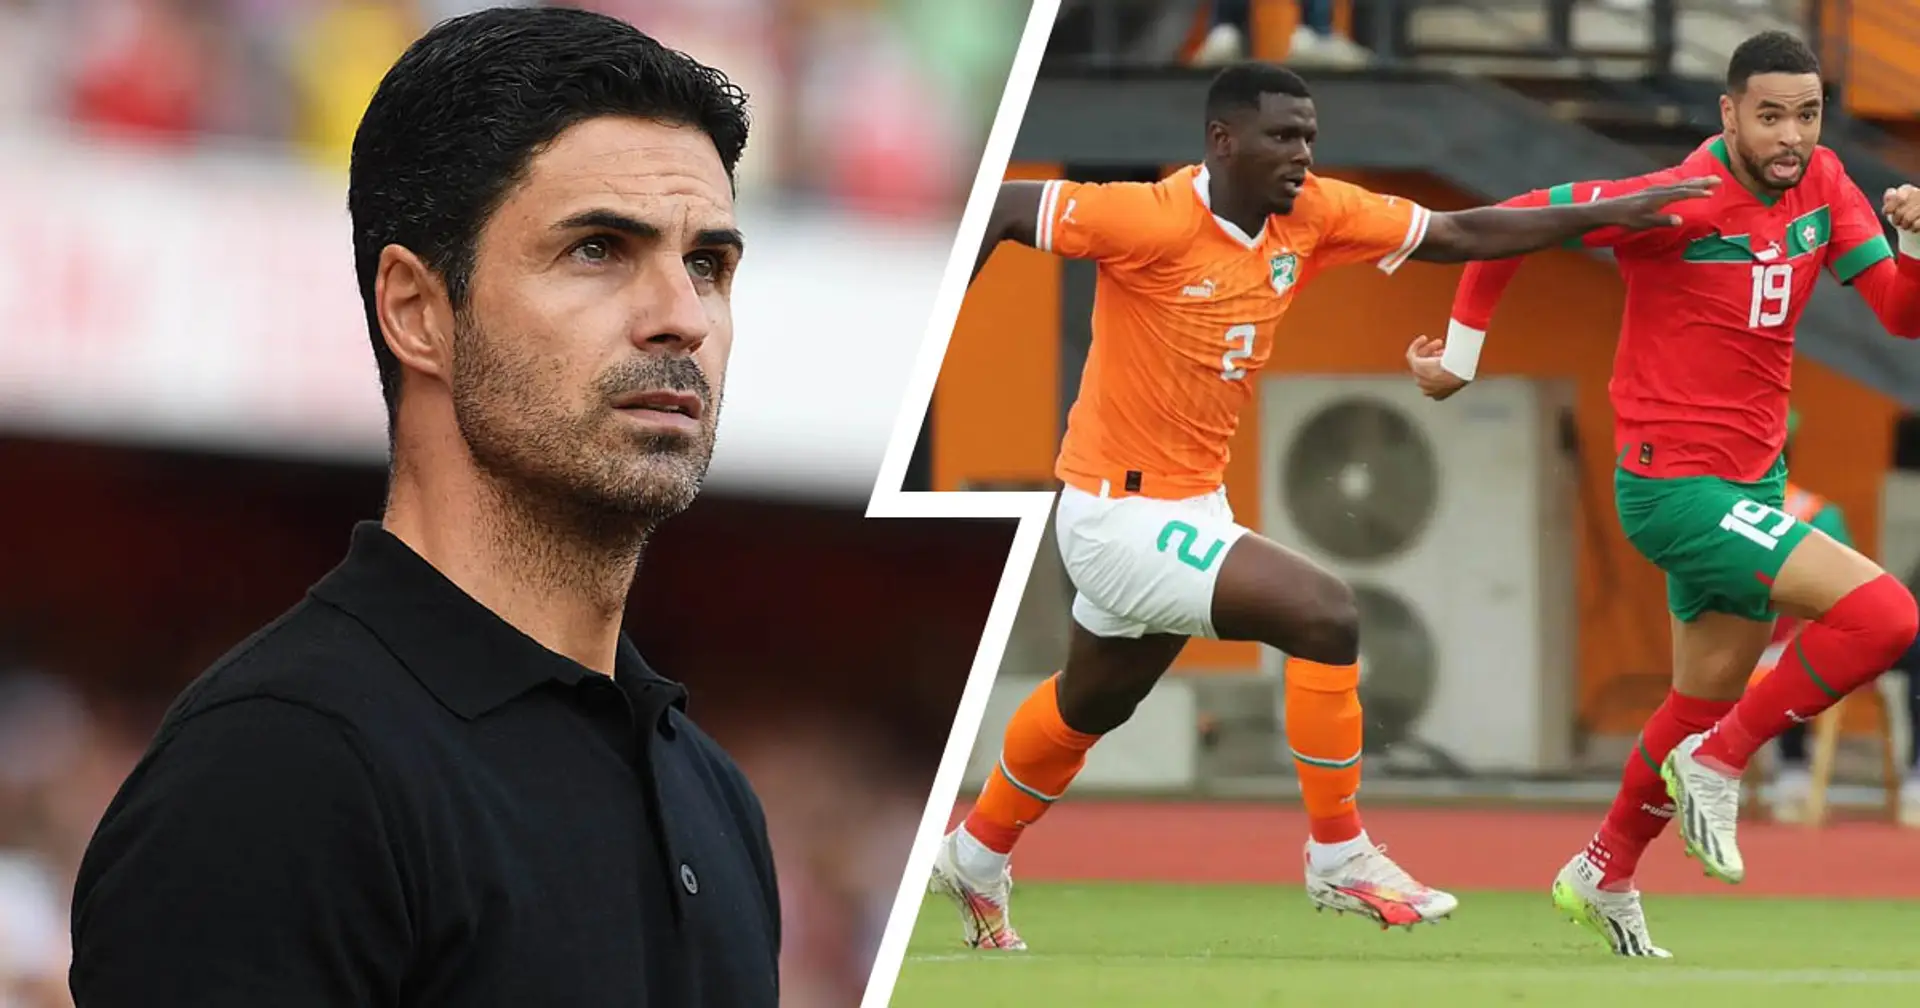 Arsenal scouting Ivory Coast defender & 3 more big stories you might've missed